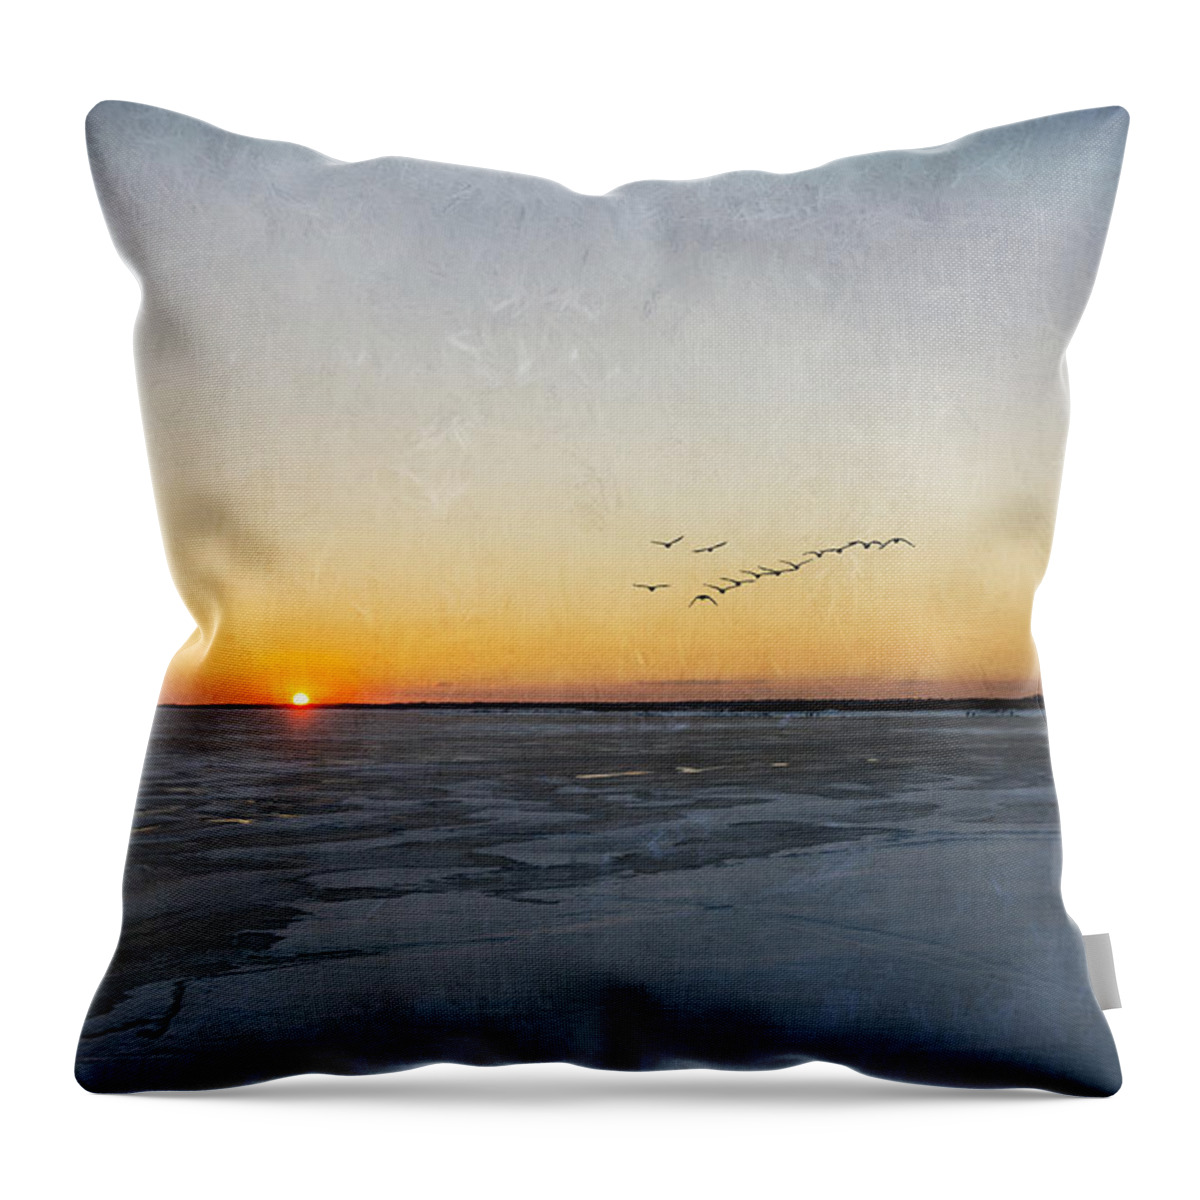 Sunset Throw Pillow featuring the photograph Sunset On The Frozen Bay by Cathy Kovarik